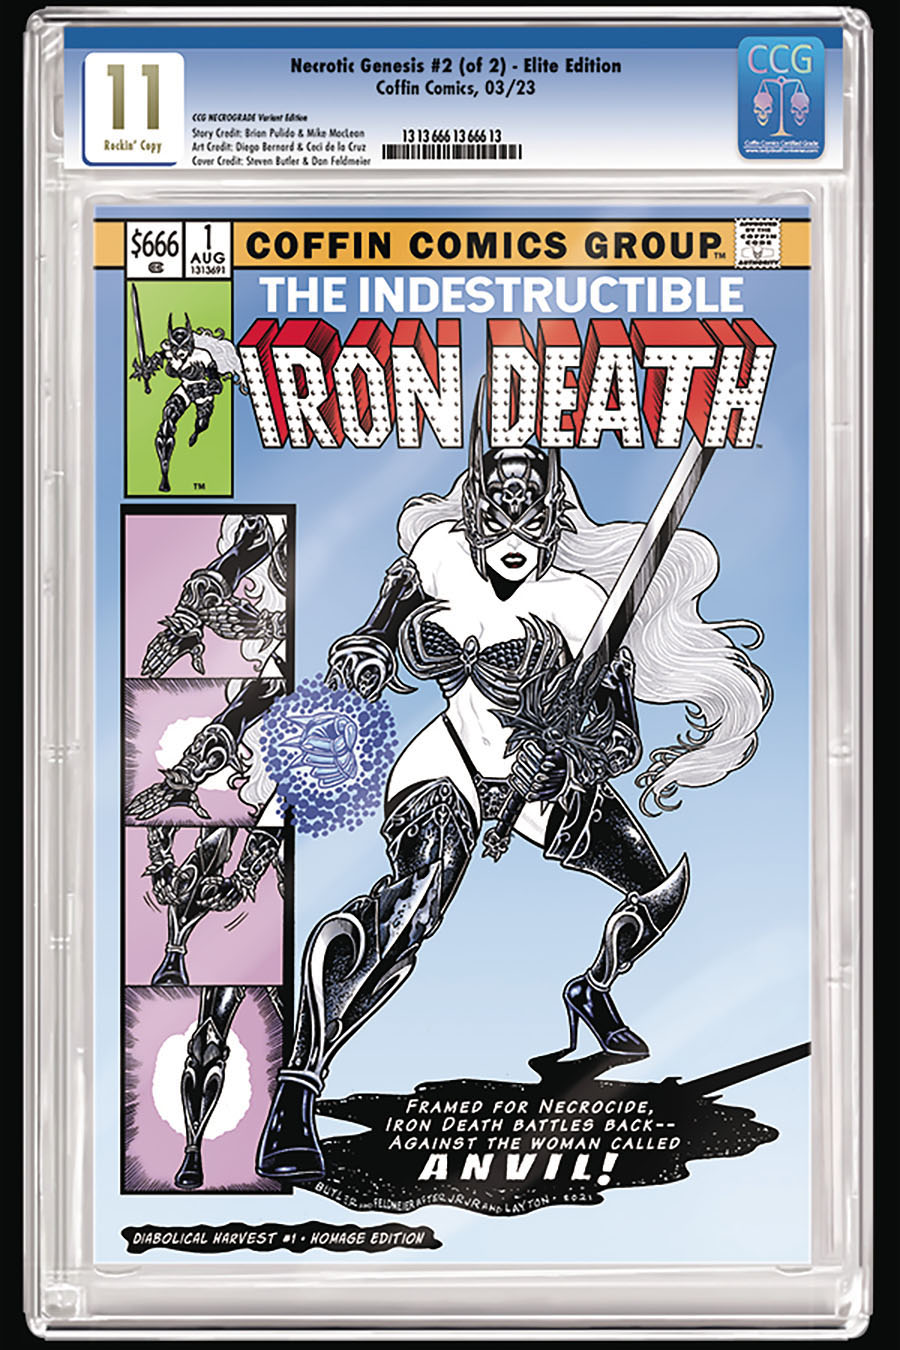 Lady Death Necrotic Genesis #2 Cover F Iron Death Slabbed Edition